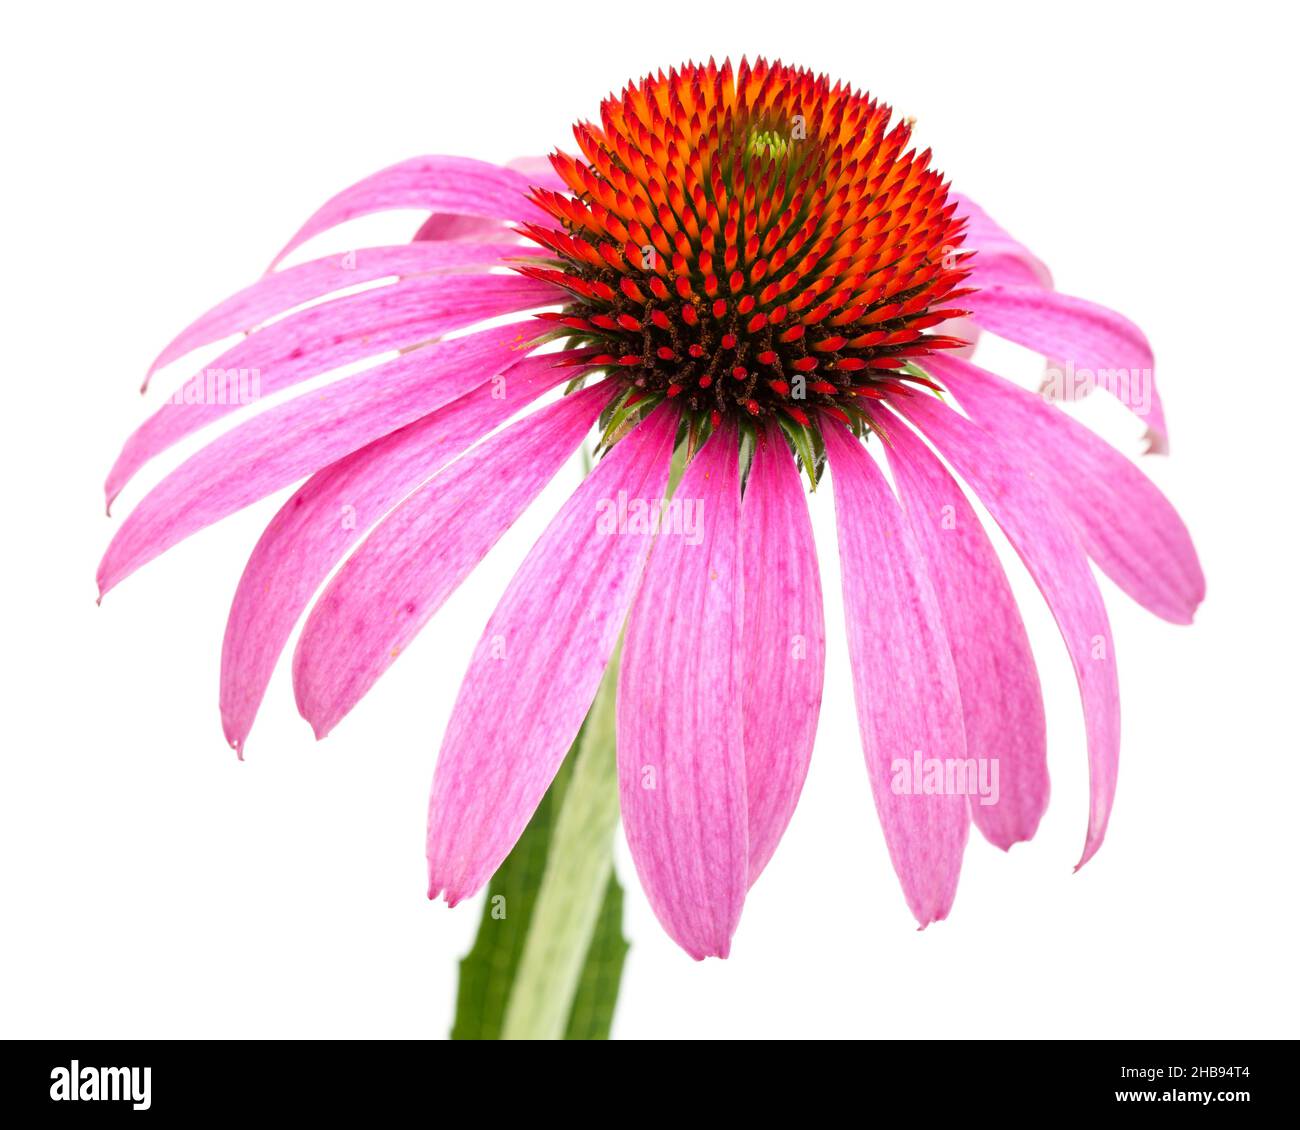 Echinacea, coneflower, red, one, detail, close, flower, top, single, fresh, alone, face, medicine, neck, herbal, close-up, background, medicinal plant Stock Photo